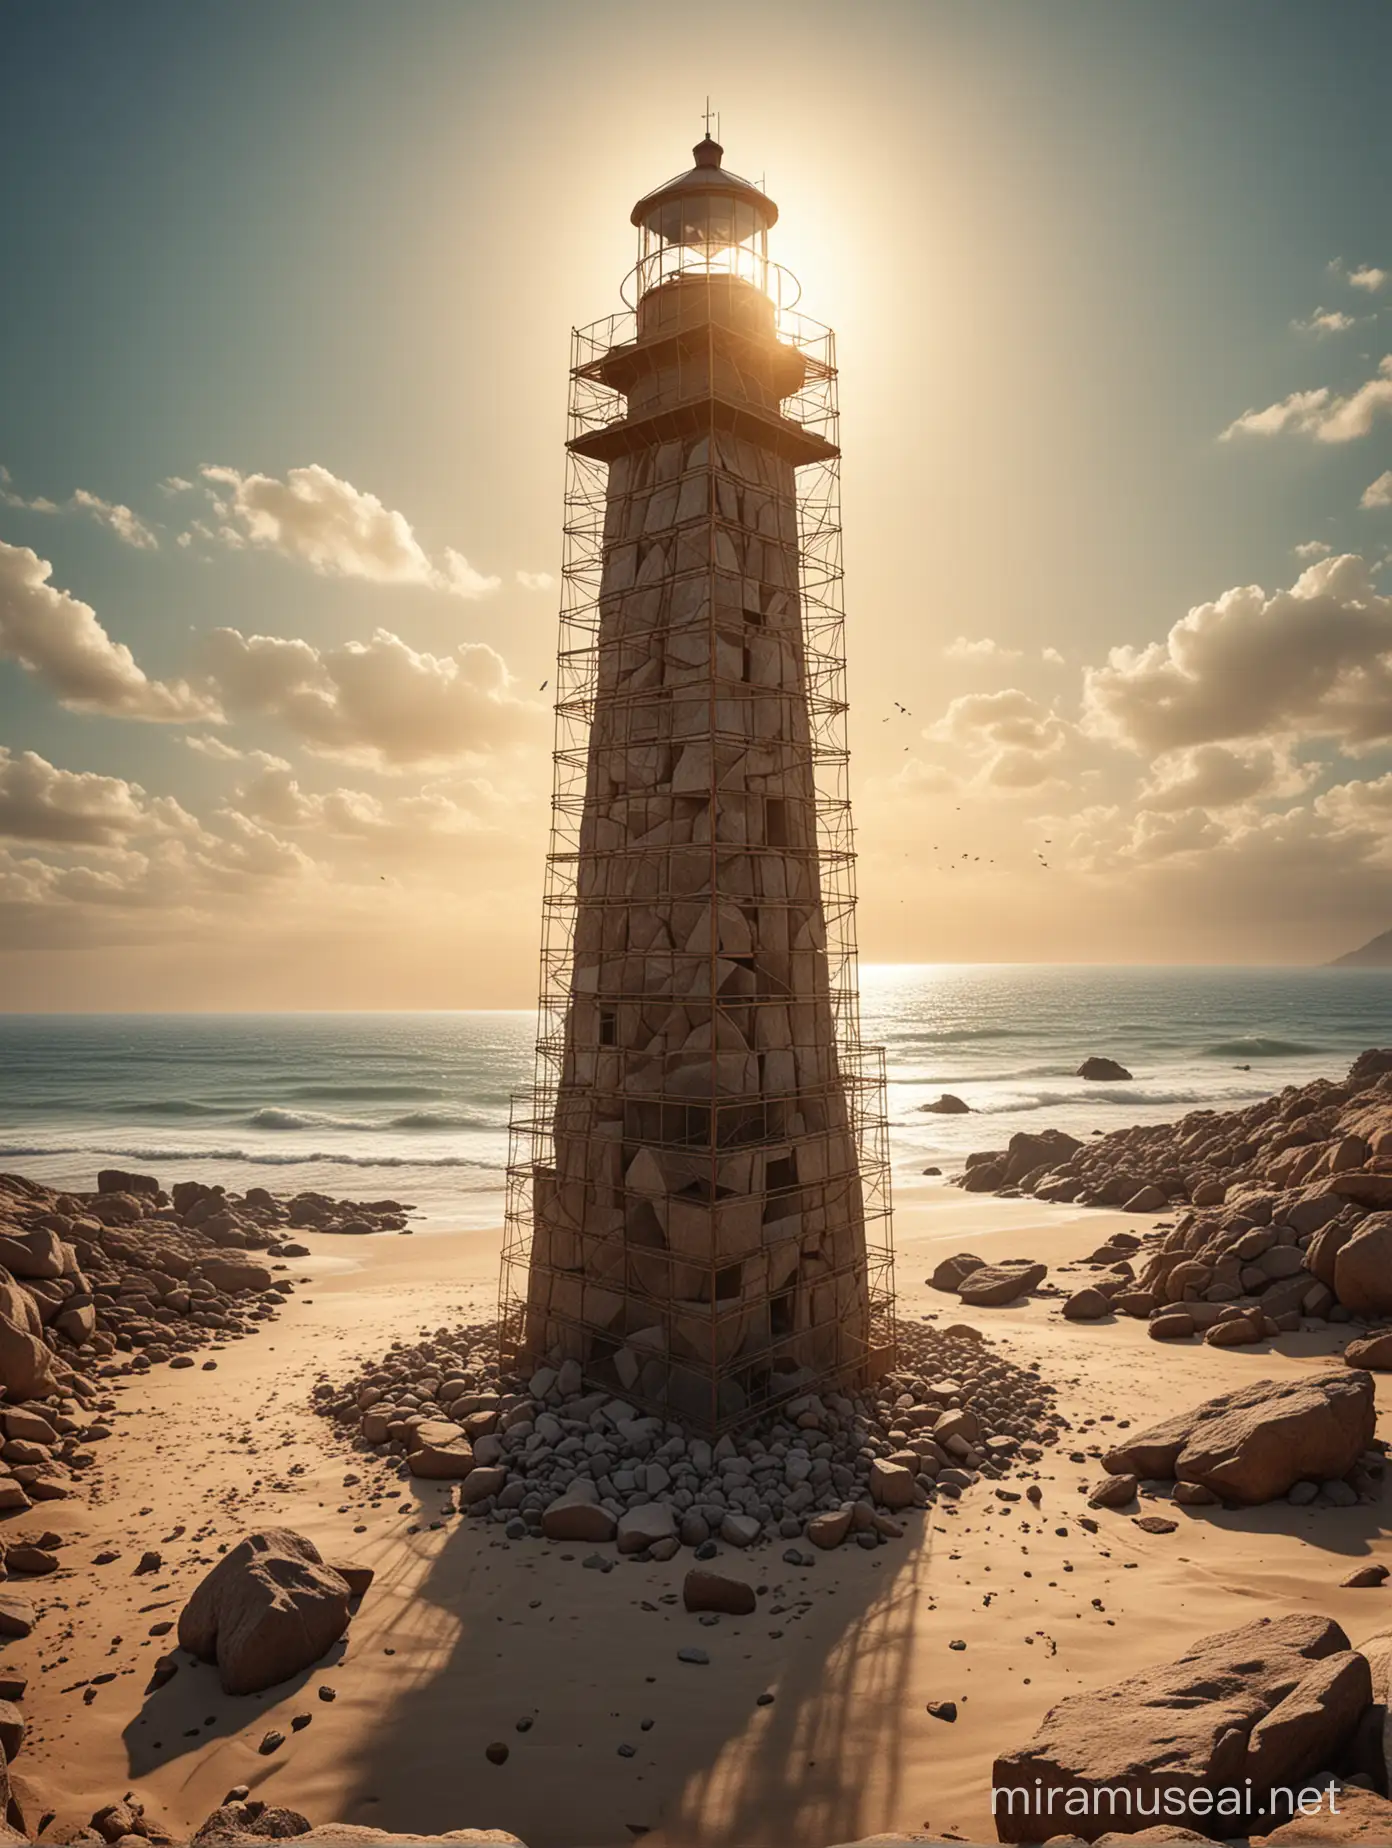 Desert Lighthouse Wireframe Tower with Sunset and Sea Mystique